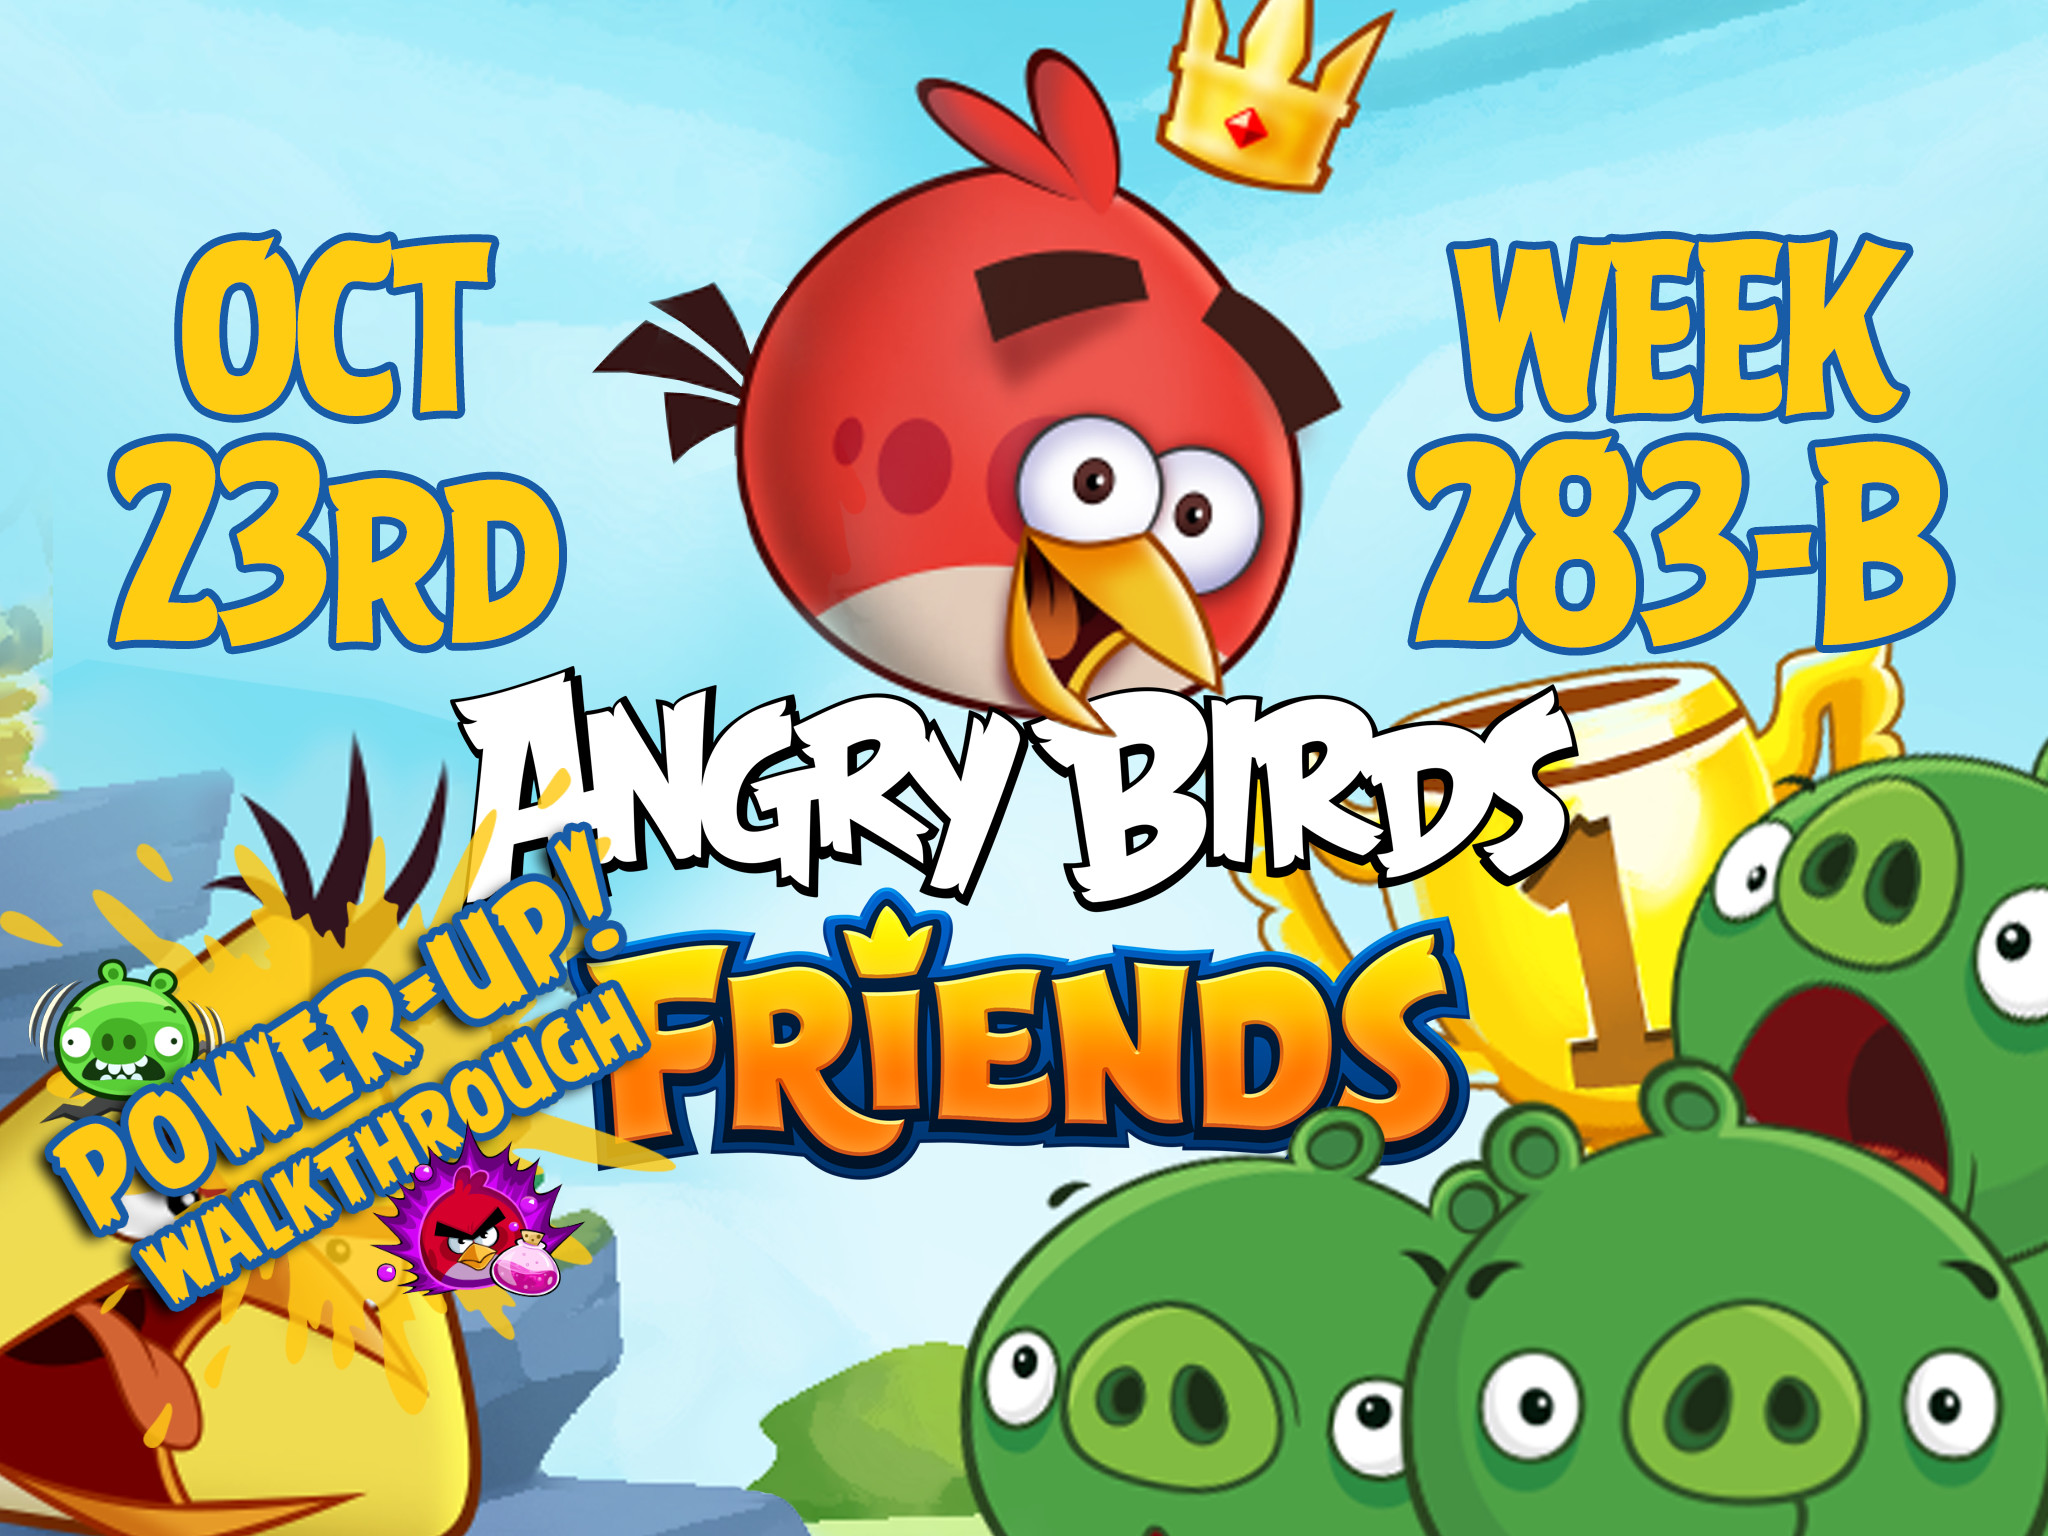 Angry Birds Friends Tournament Week 283-B Feature Image PU